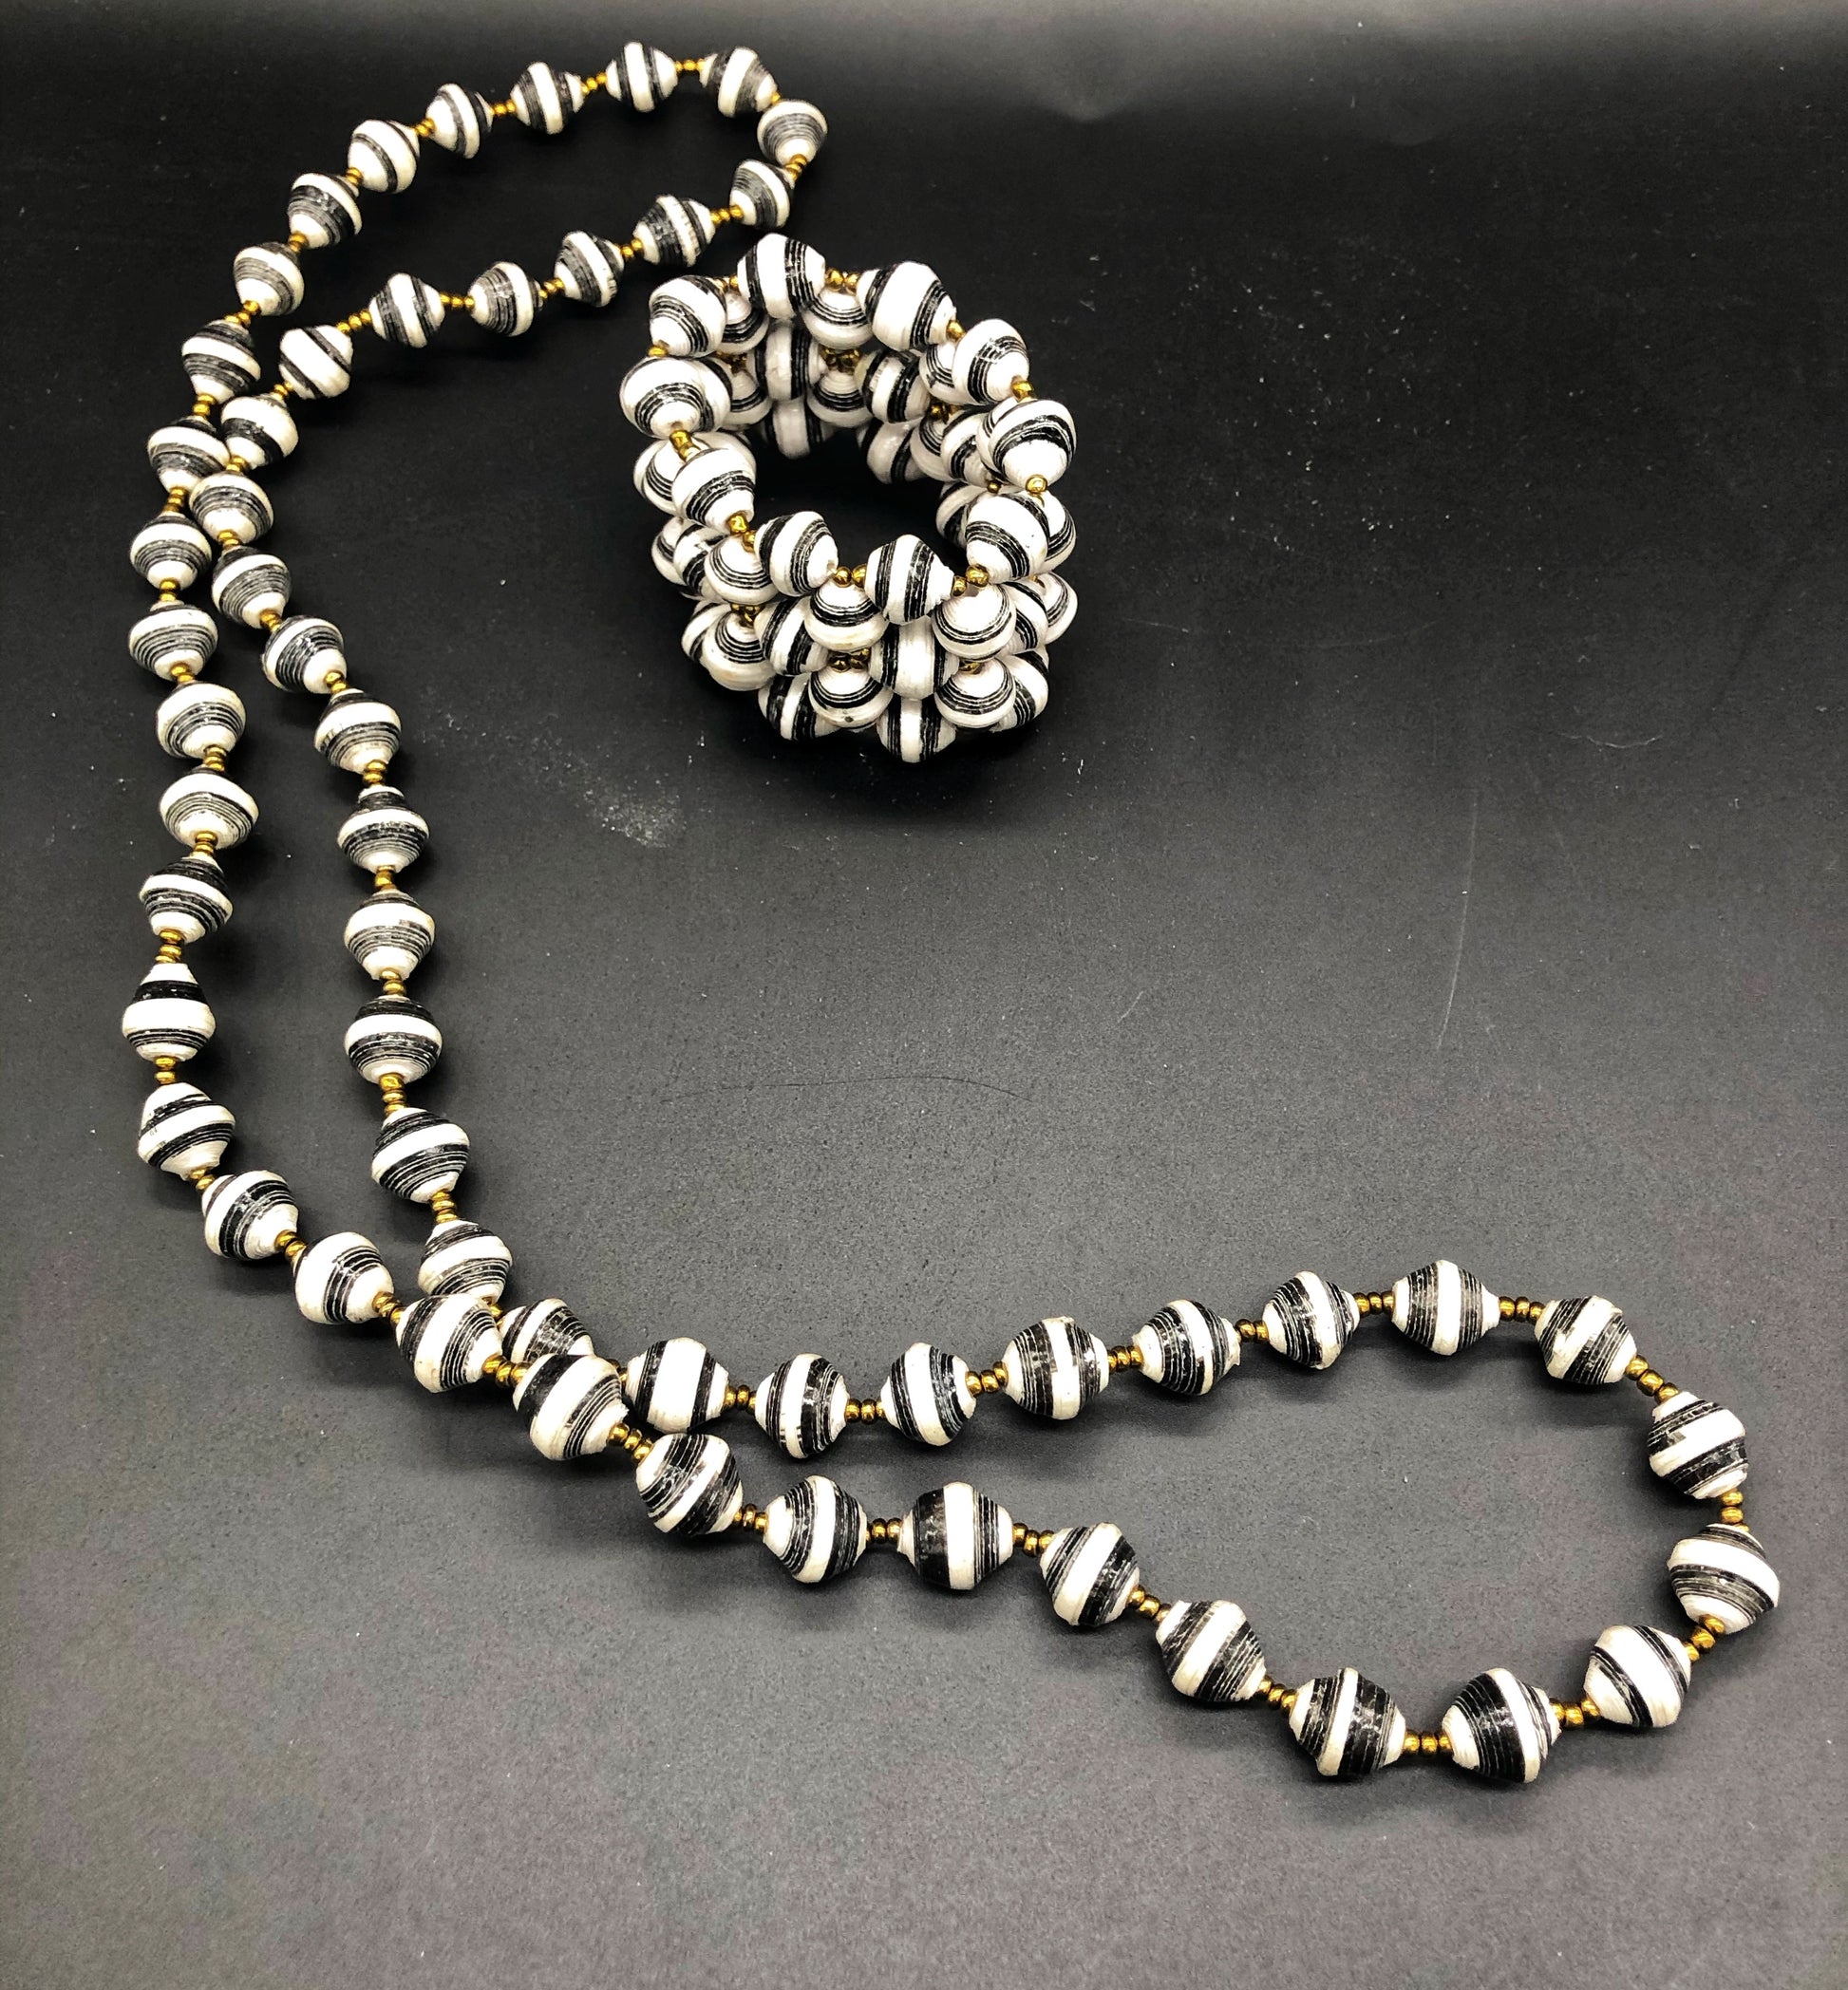 Hand crafted black and white medium length necklace and stretch bracelet set.  Approximately 18" Long. Made from magazines. Each bead individually rolled by hand.  Stylish and Fashionable for casual or dressy. Fair trade. 